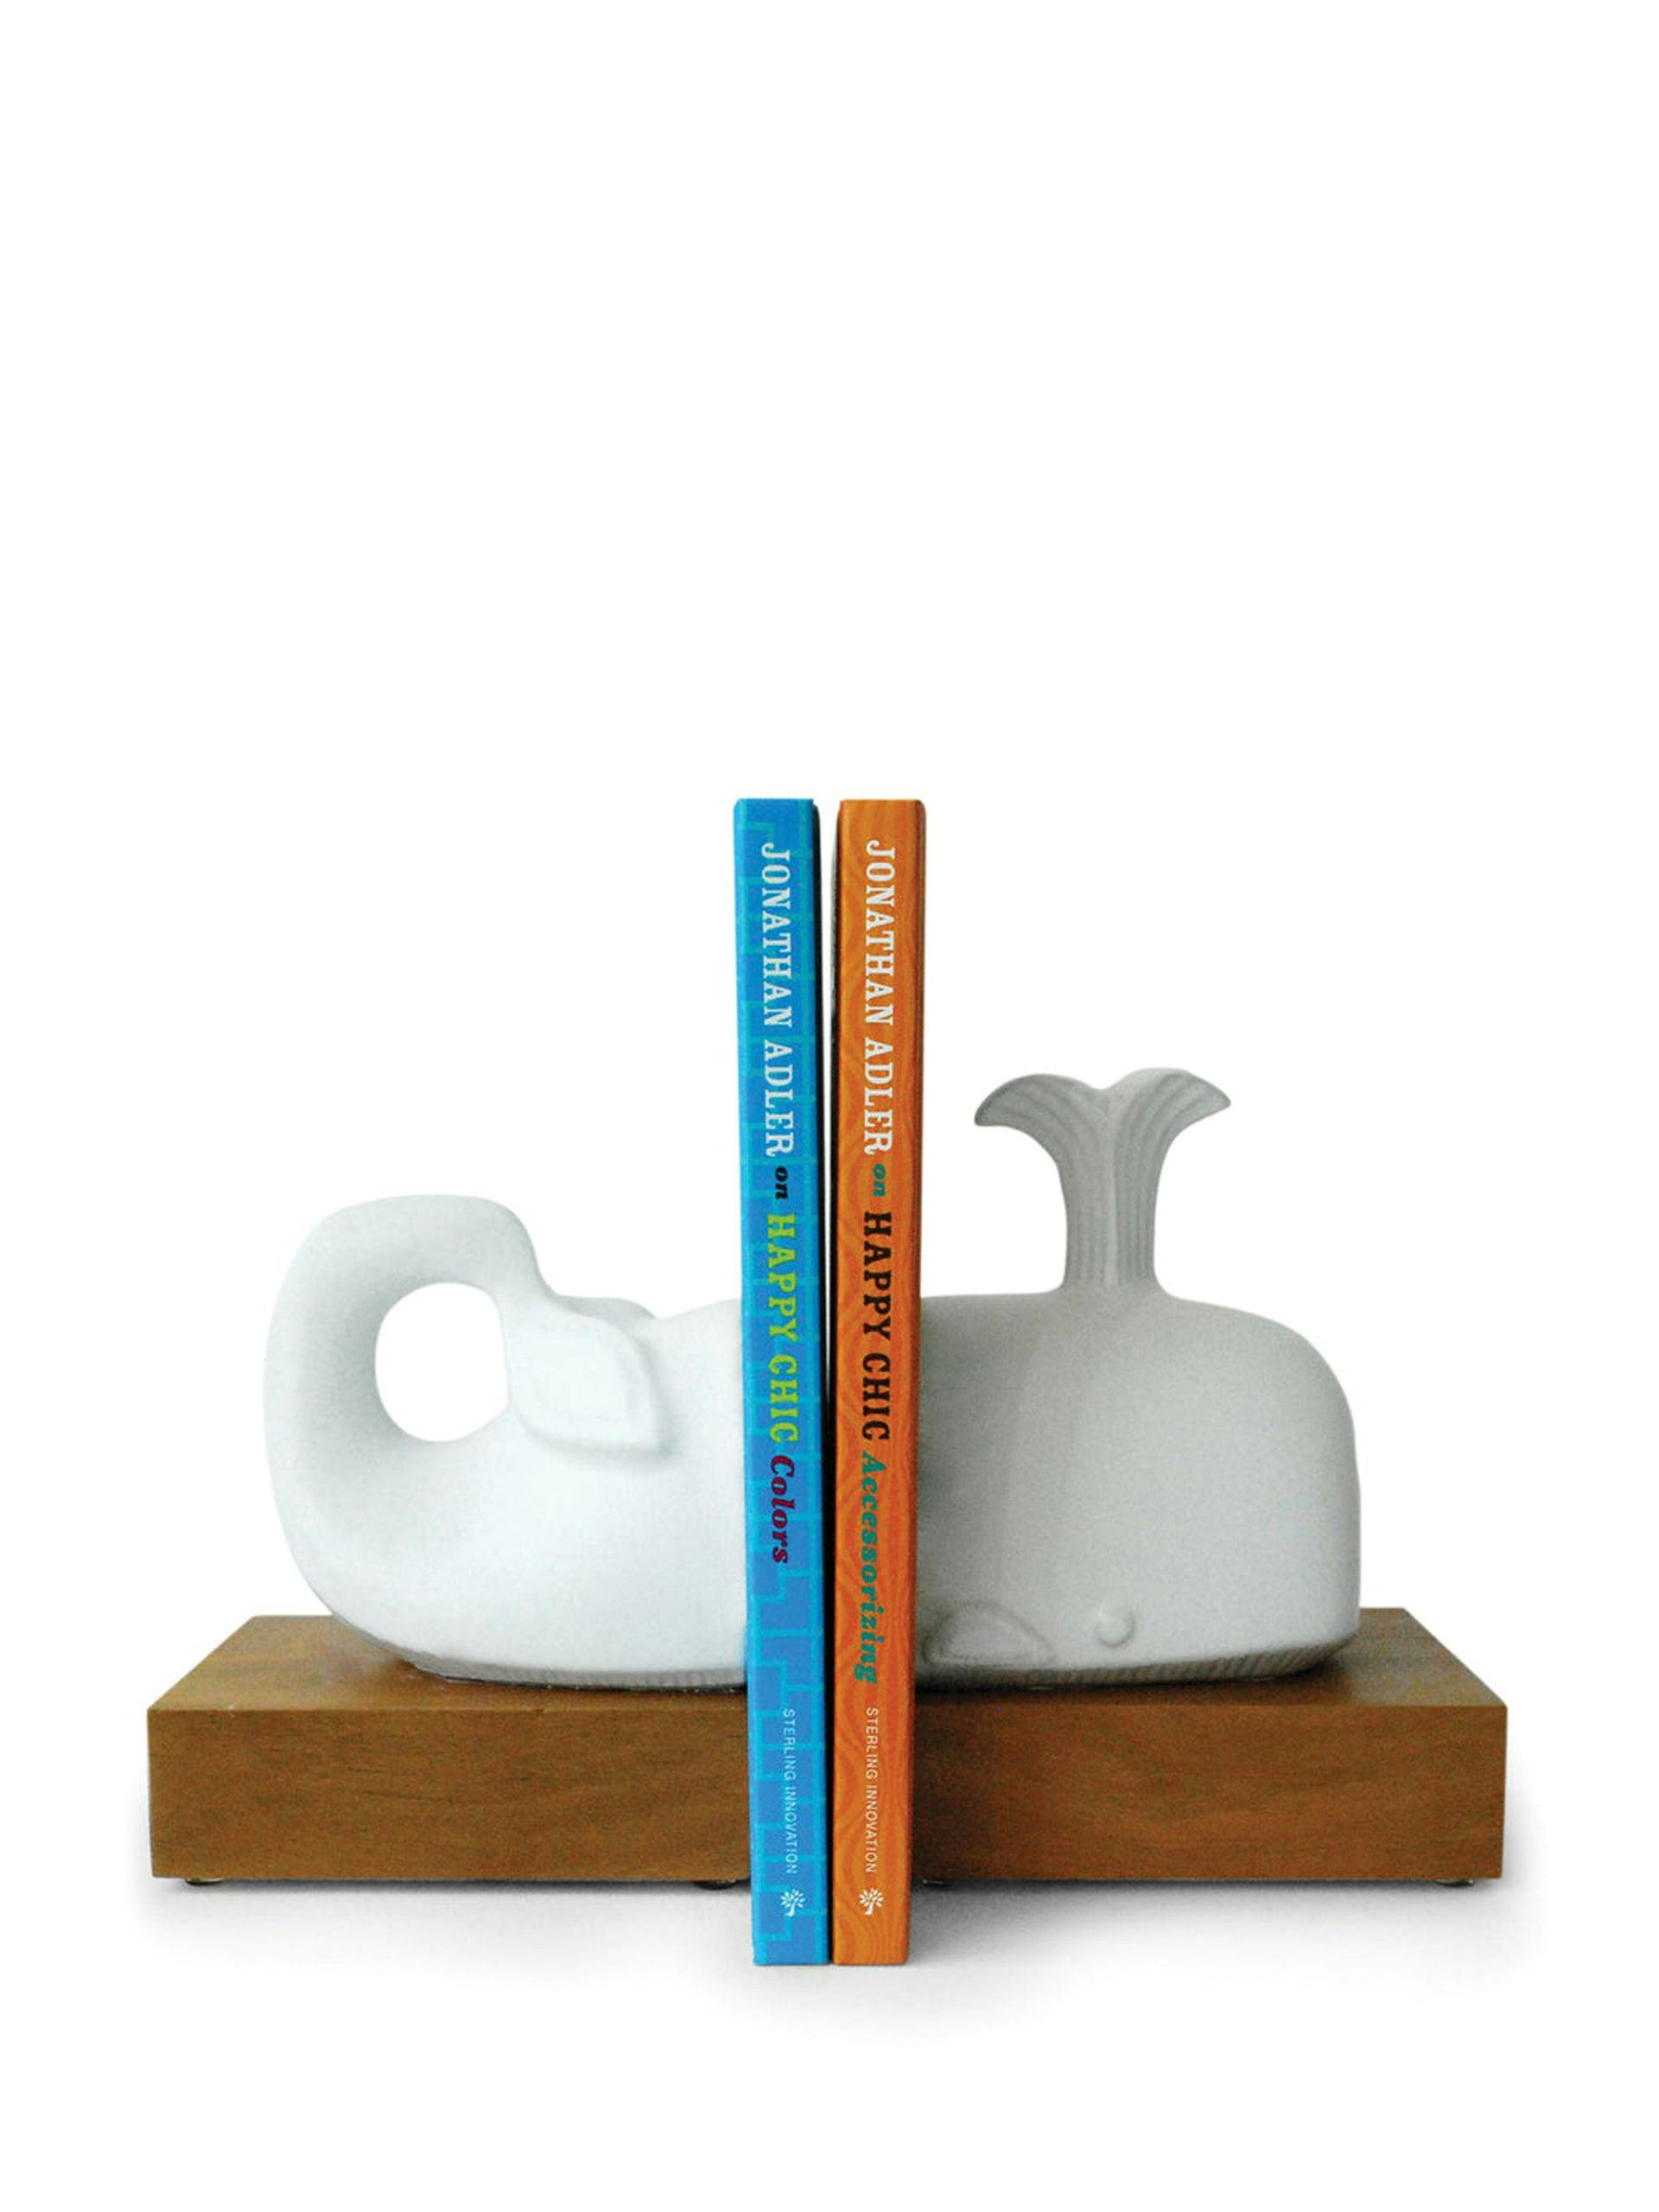 Menagerie whale bookends